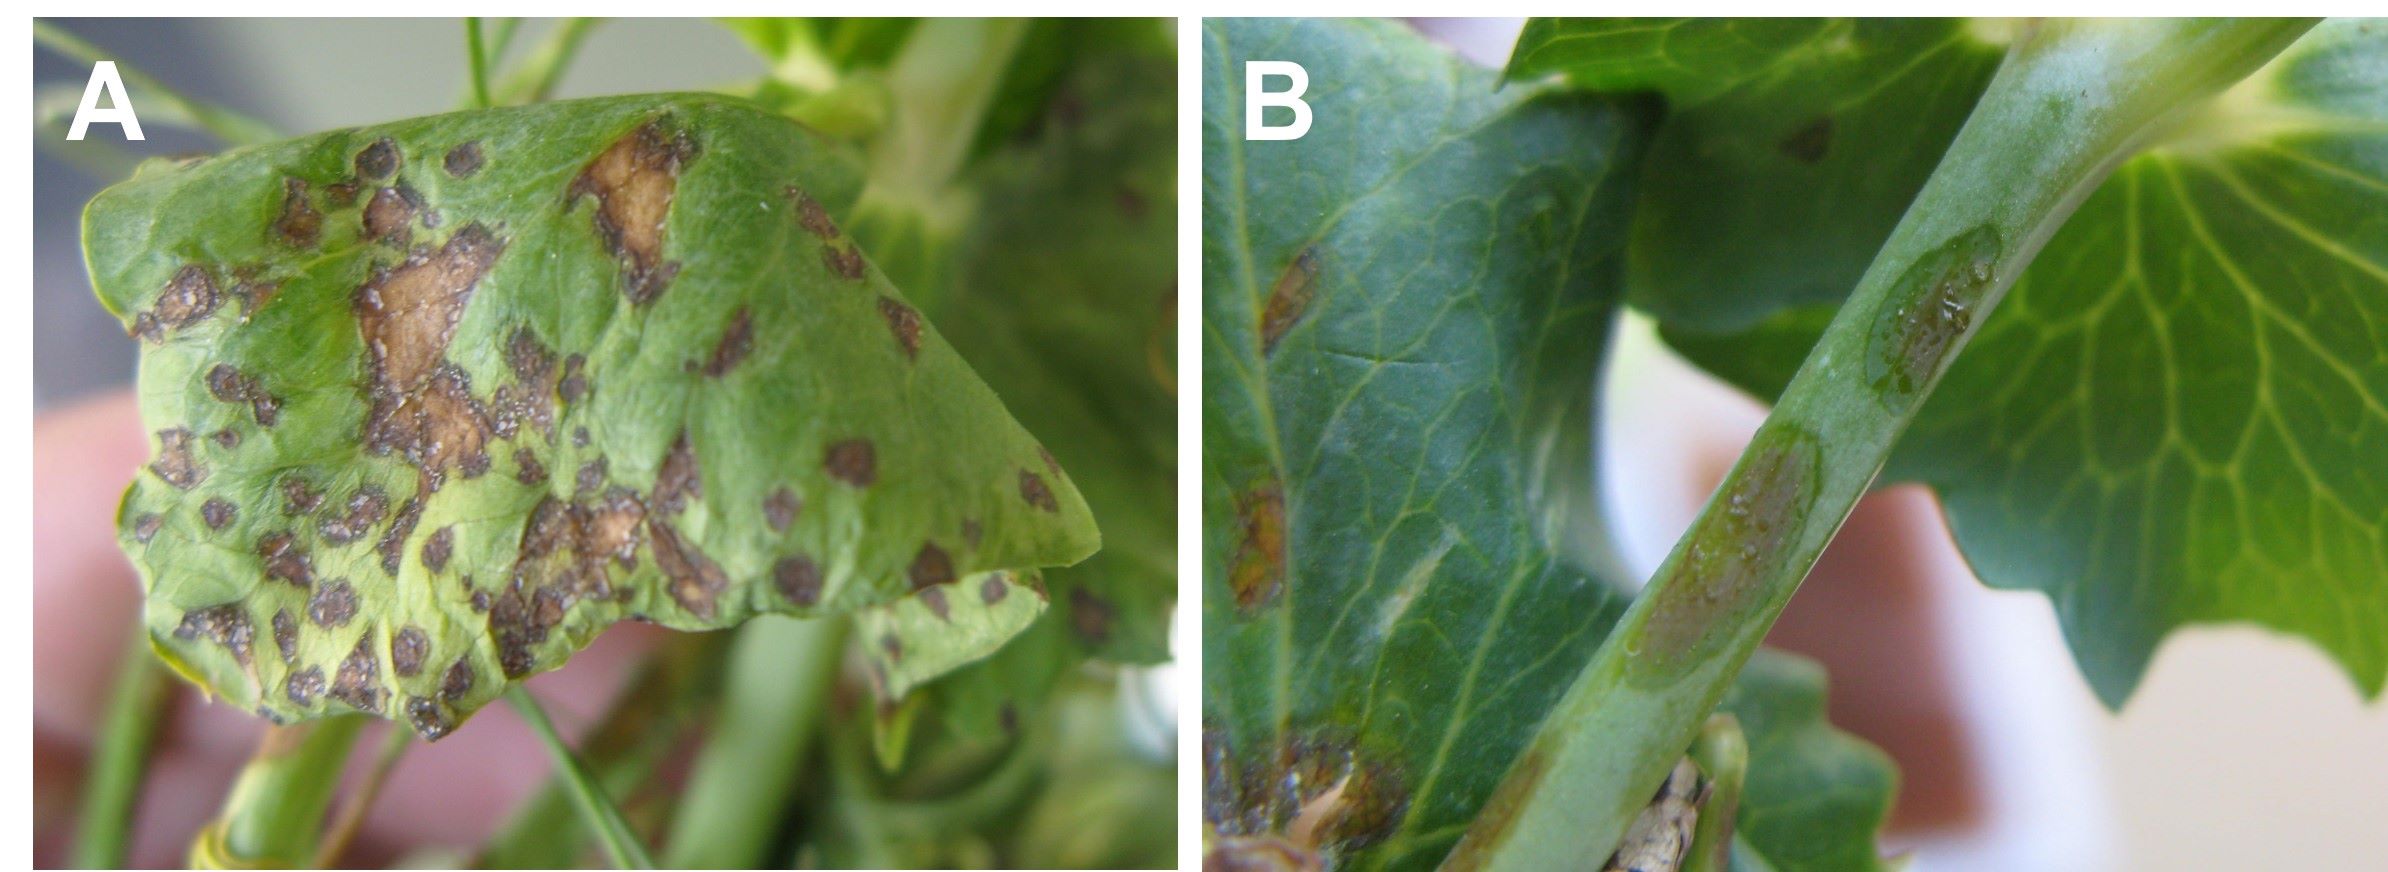 Brown angular lesions on pea leaf from bacterial blight. This image is set by another which shows water-soaked lesions and bacterial ooze where hailstones hit a petiole